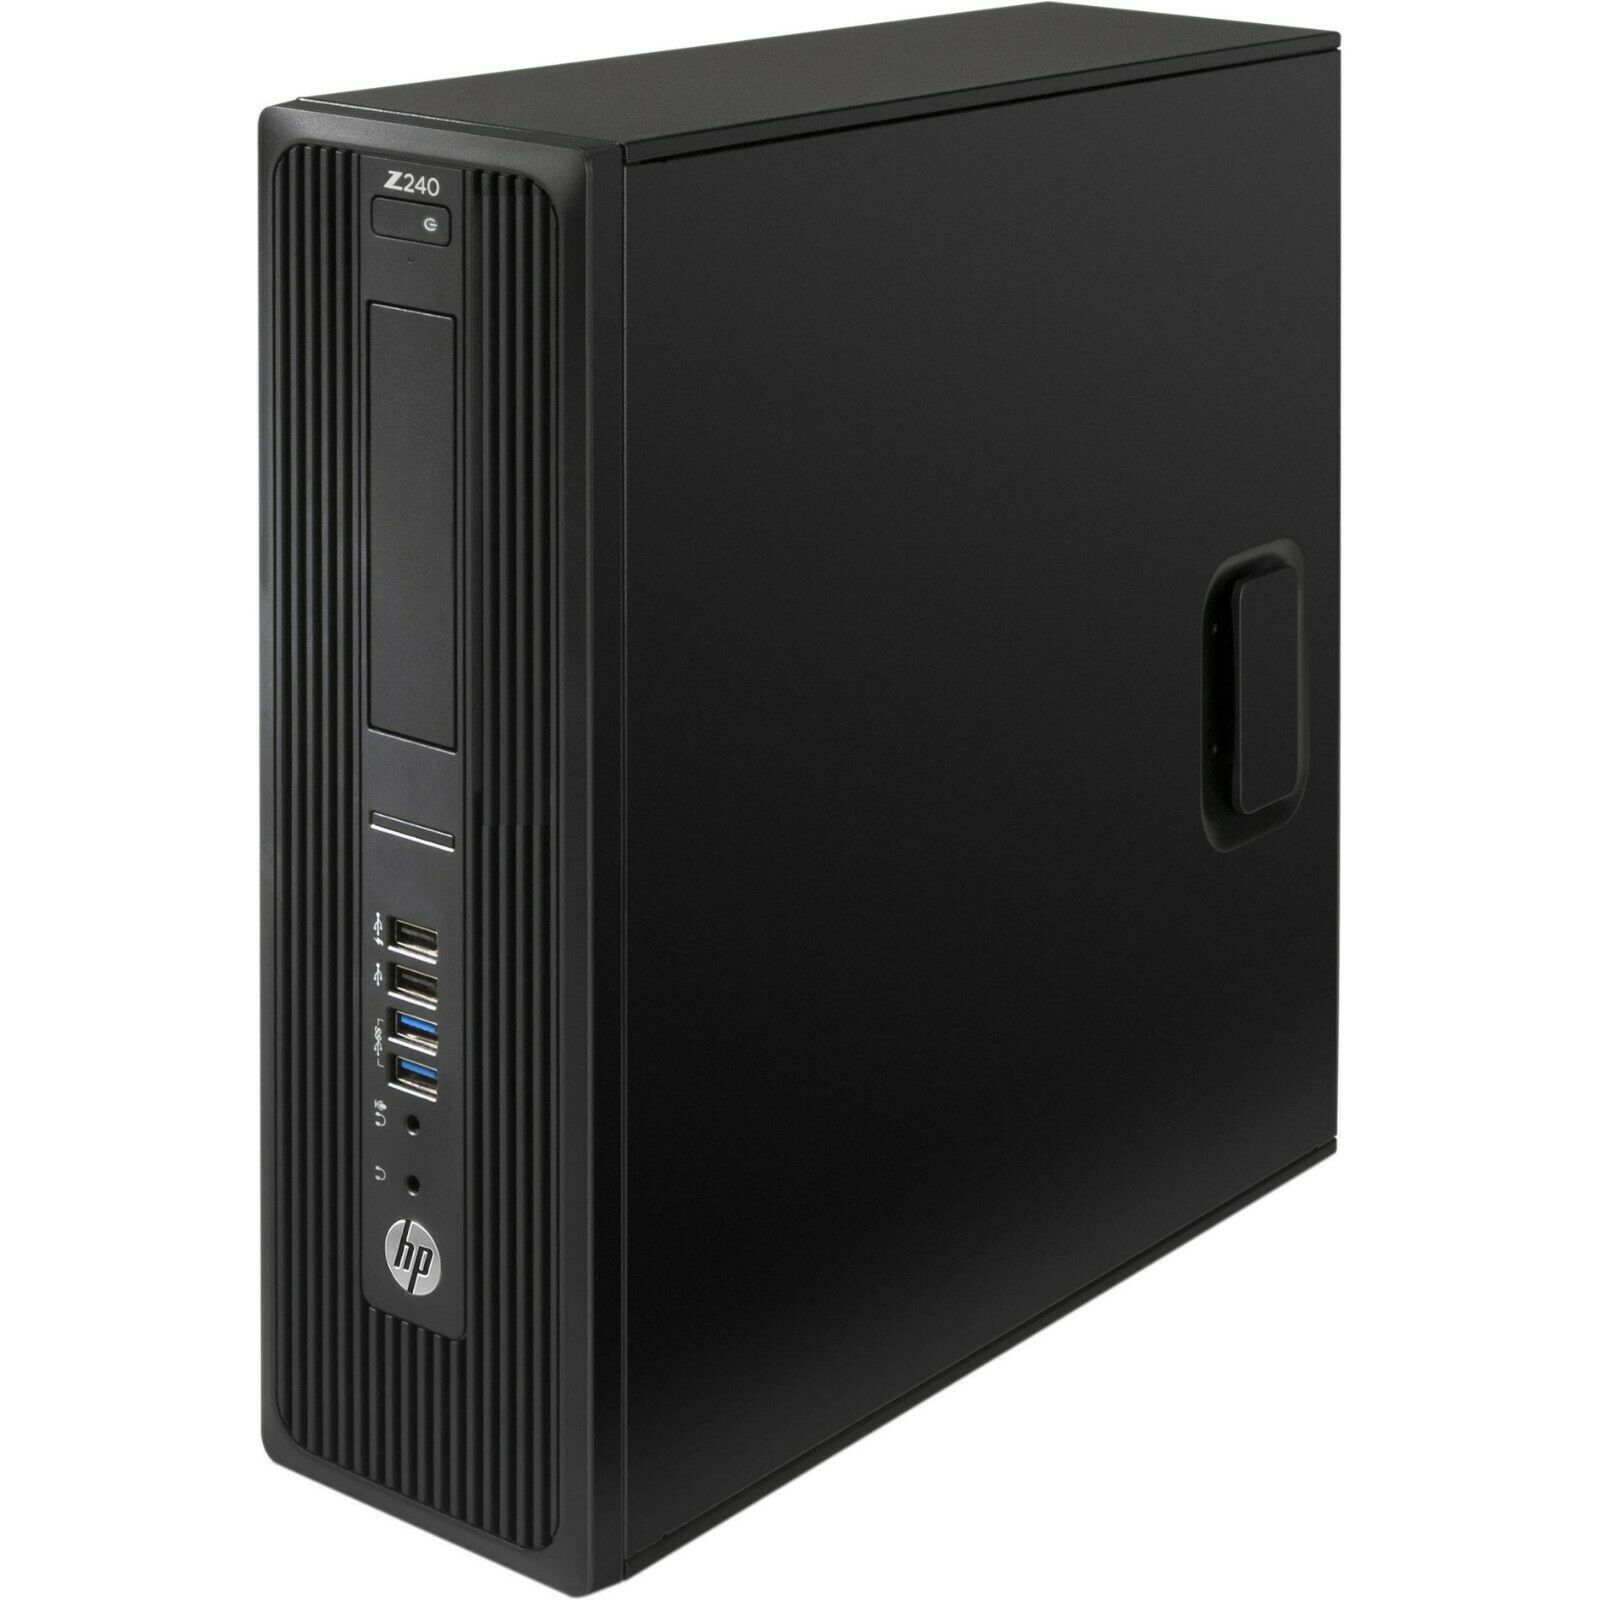 Restored HP Z240 Workstation SFF Computer Core i5 6th 3.4GHz, 8GB Ram, 500GB HDD, New 19" LCD, Keyboard and Mouse, Wi-Fi, Win10 Pro Desktop PC (Refurbished) - image 2 of 9